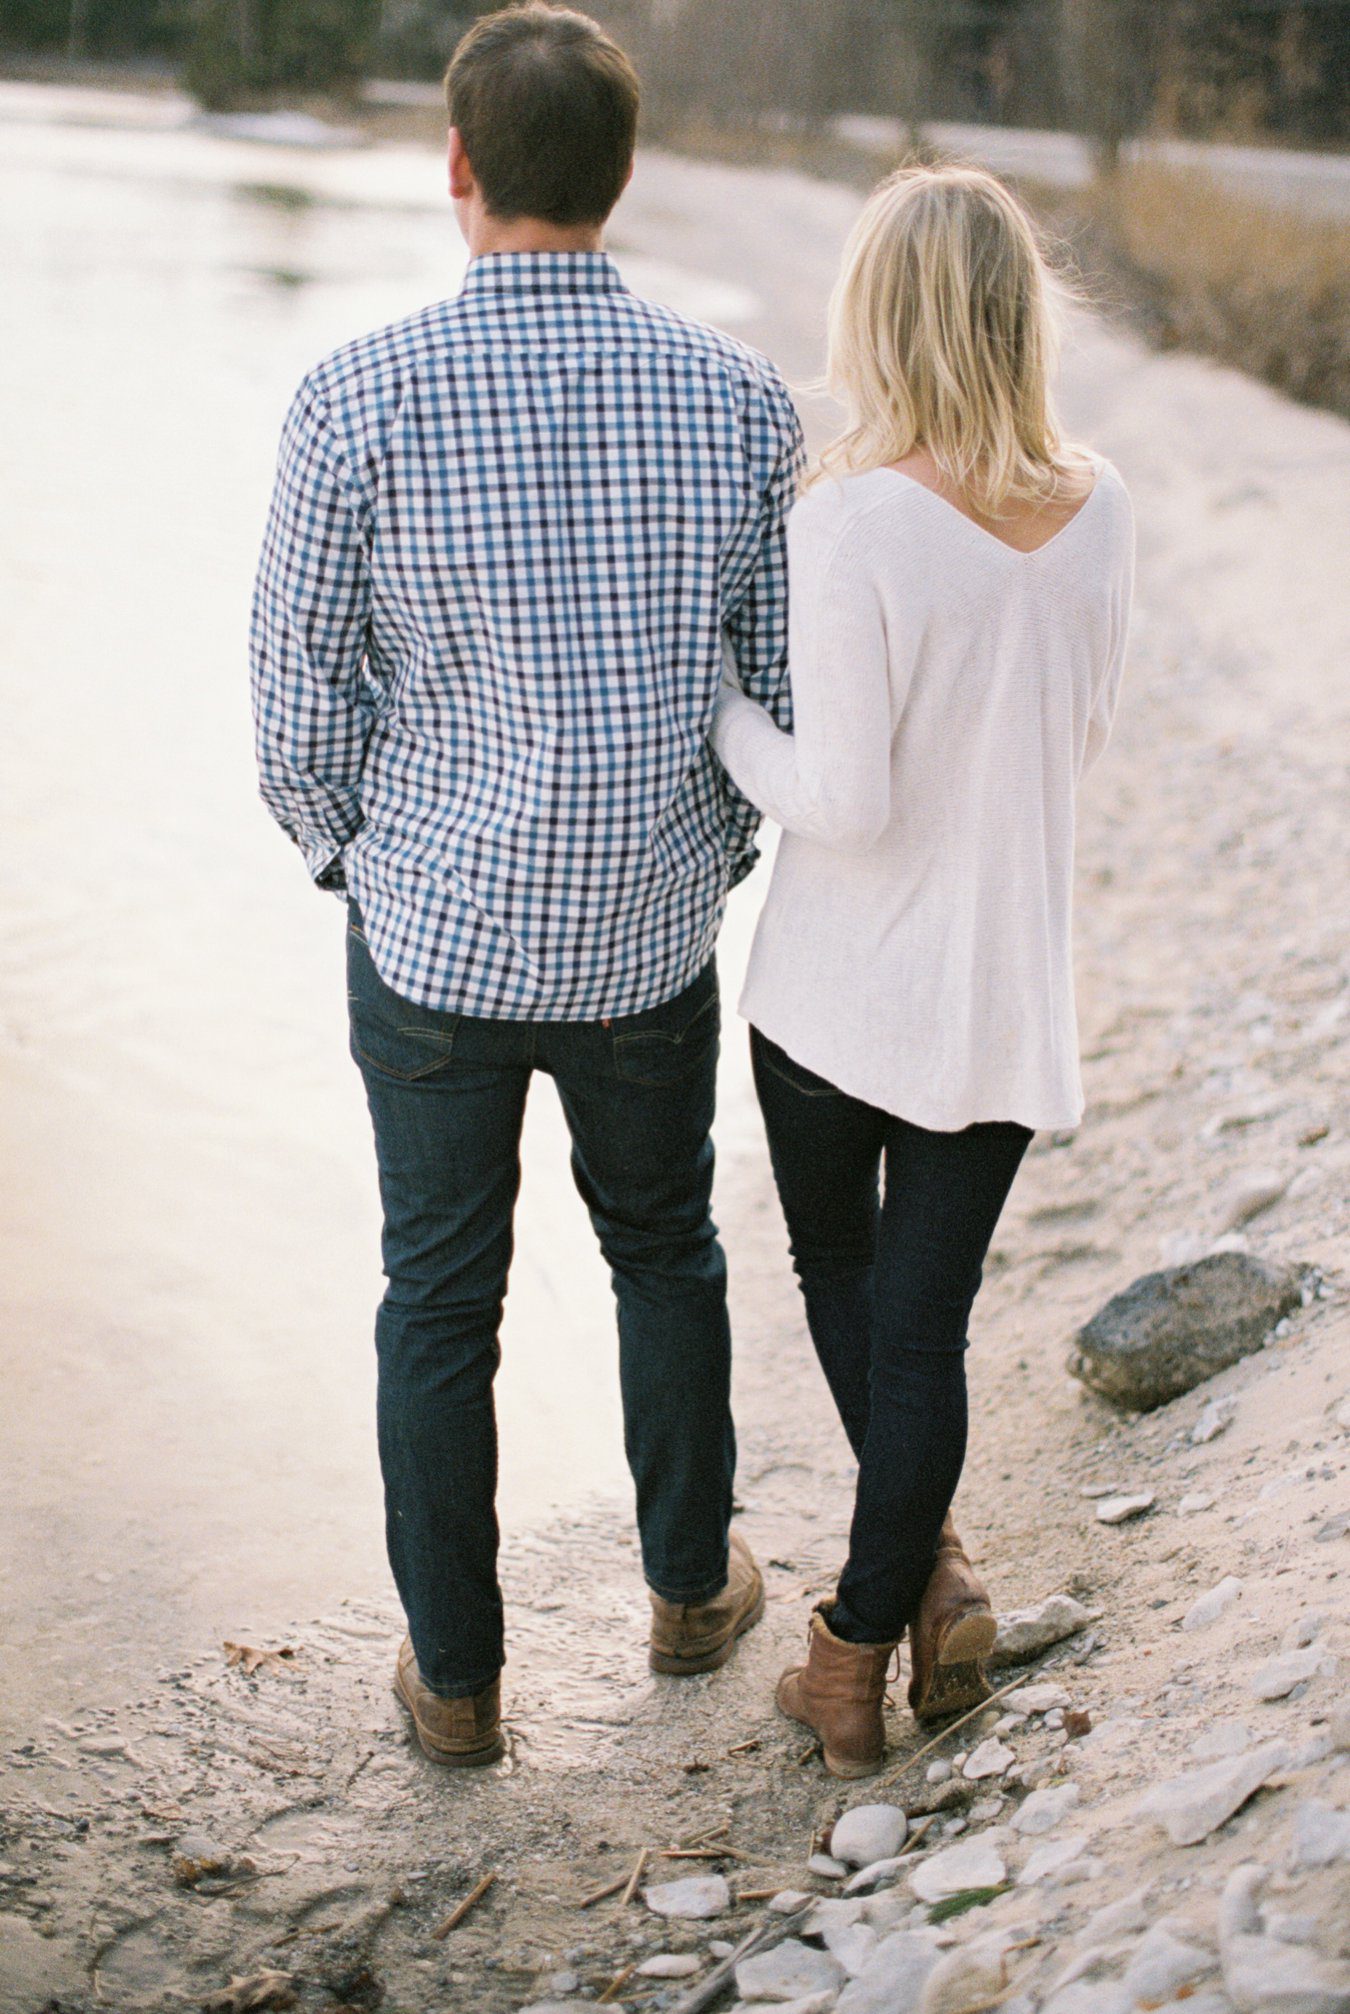 Traverse City Engagagement Photography | Cory Weber Photography